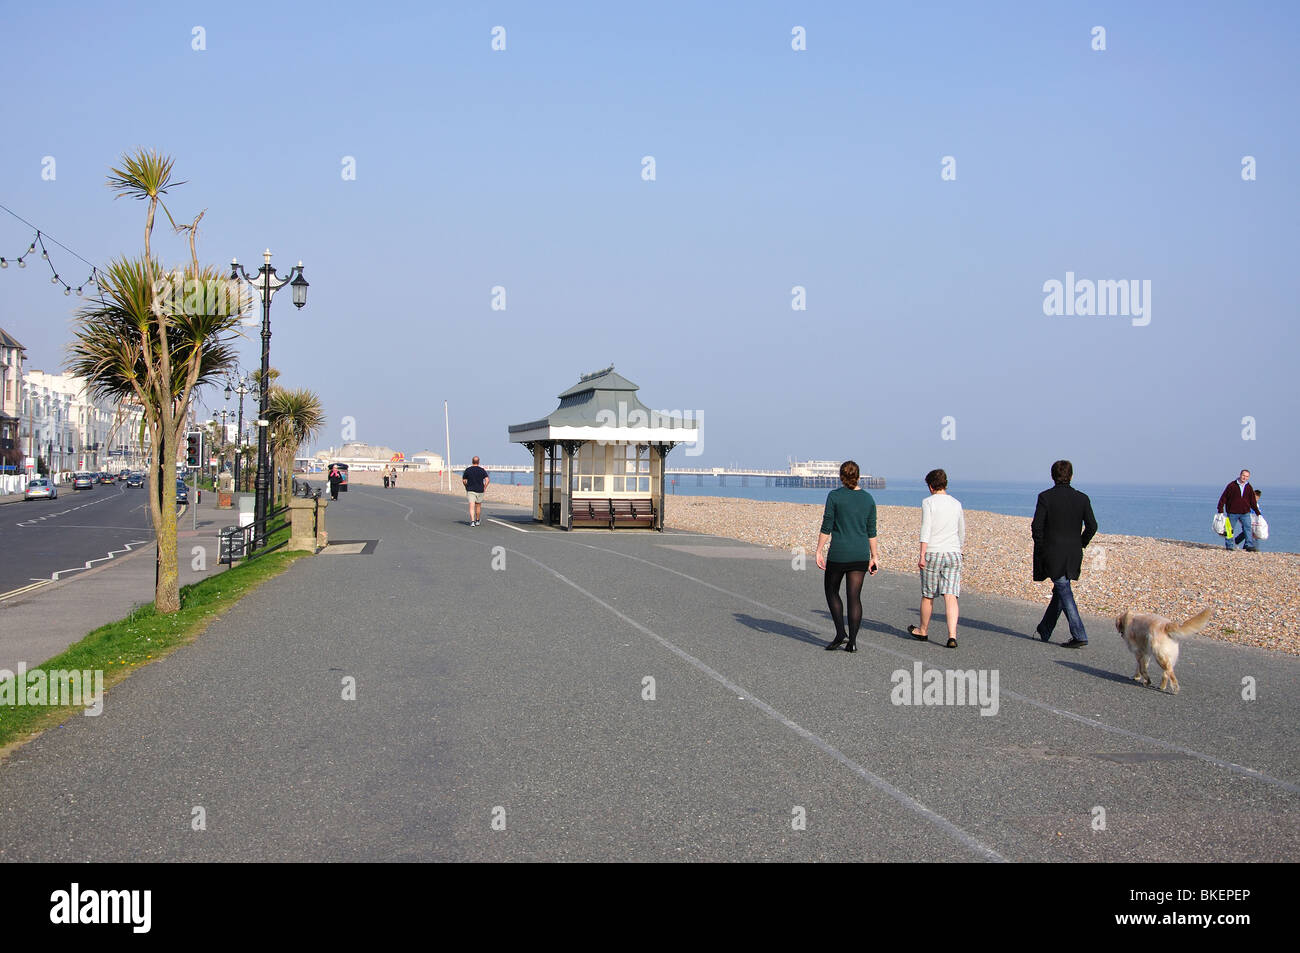 Dal lungomare, Worthing West Sussex, in Inghilterra, Regno Unito Foto Stock